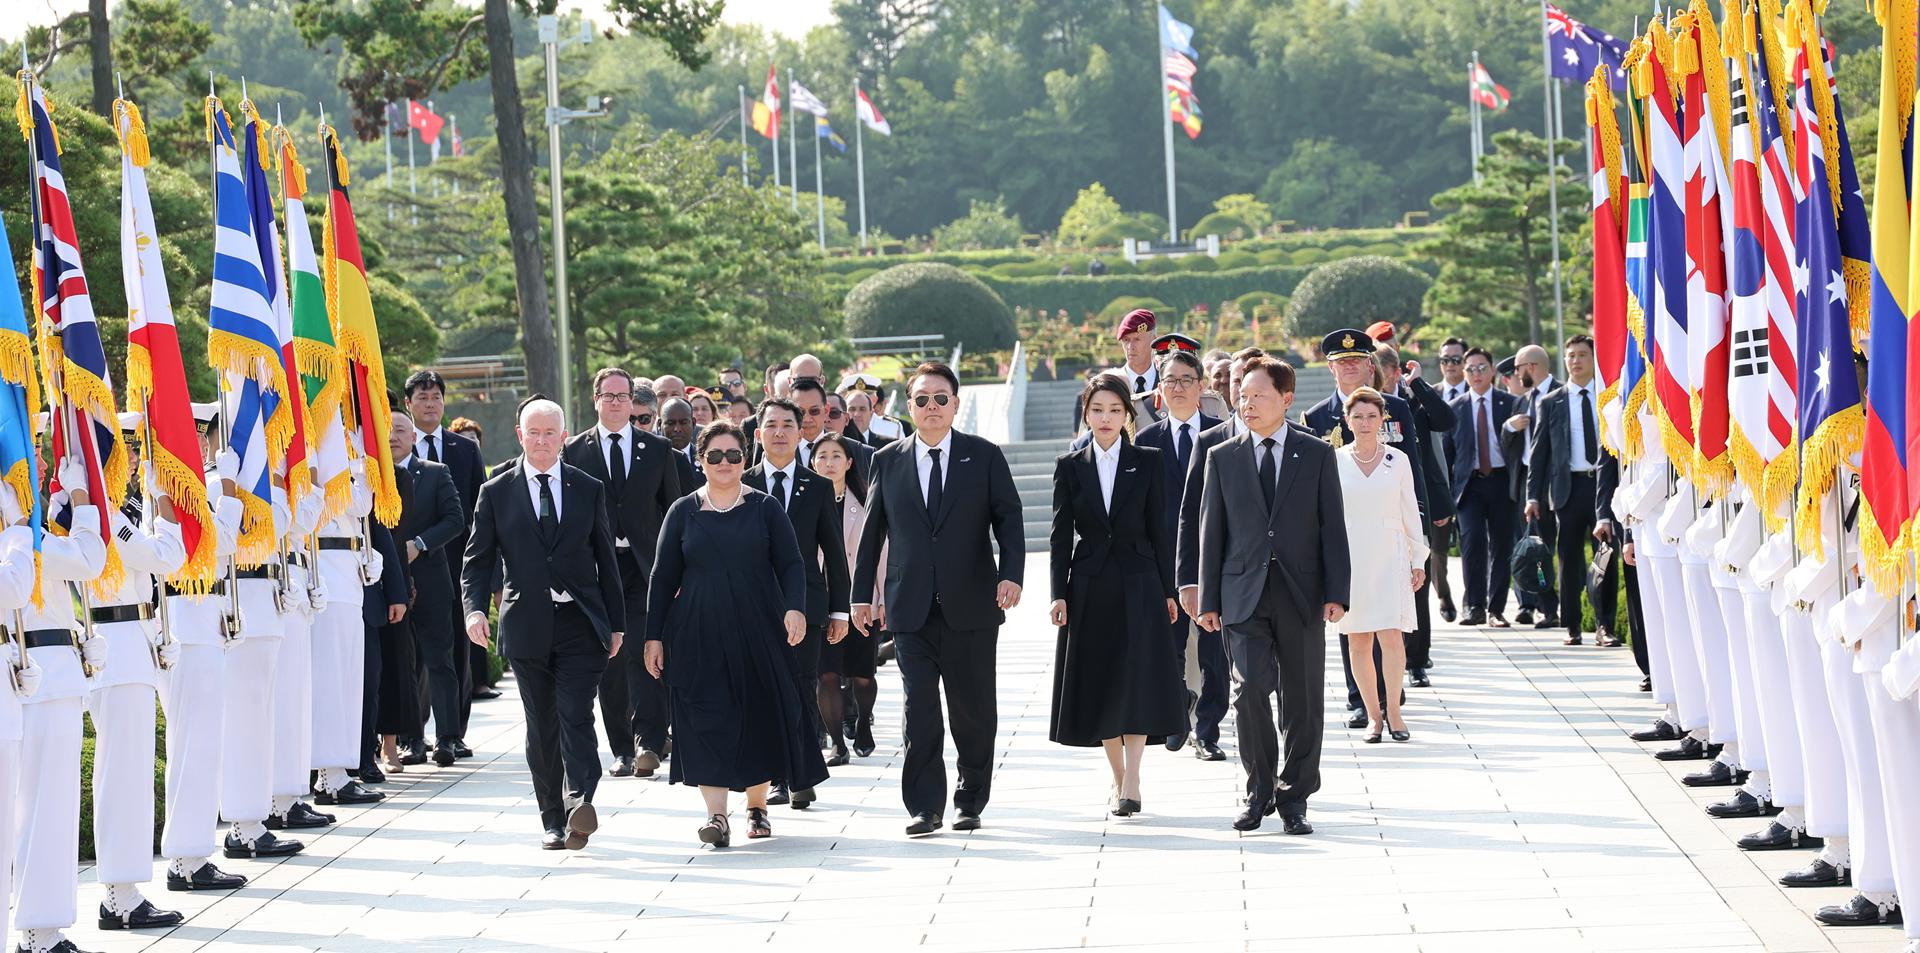 South Korea's President Yoon Suk Yeol (C, front) and his wife, Kim Keon Hee (2-R, front), visit the U.N. Memorial Park in Busan, 320 kilometers southeast of Seoul, South Korea, 27 July 2023, during the 70th anniversary of the Korean War armistice agreement. EFE/EPA/YONHAP SOUTH KOREA OUT